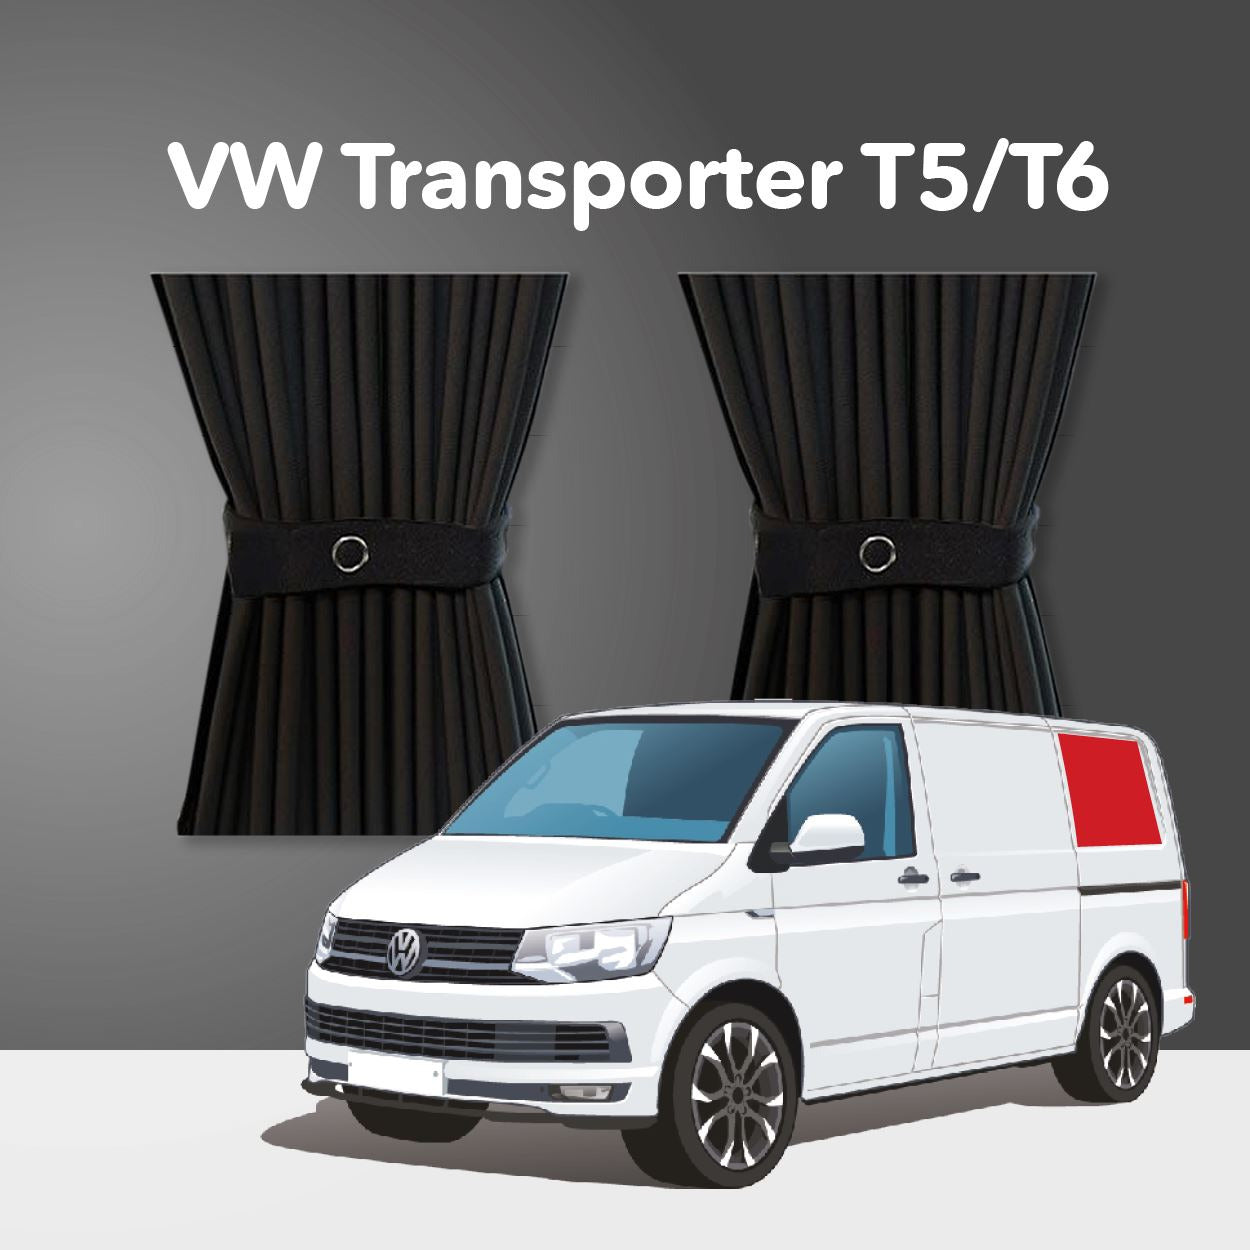 Blackout cab partition curtain kit - for the VW T5/T6 Campervan 